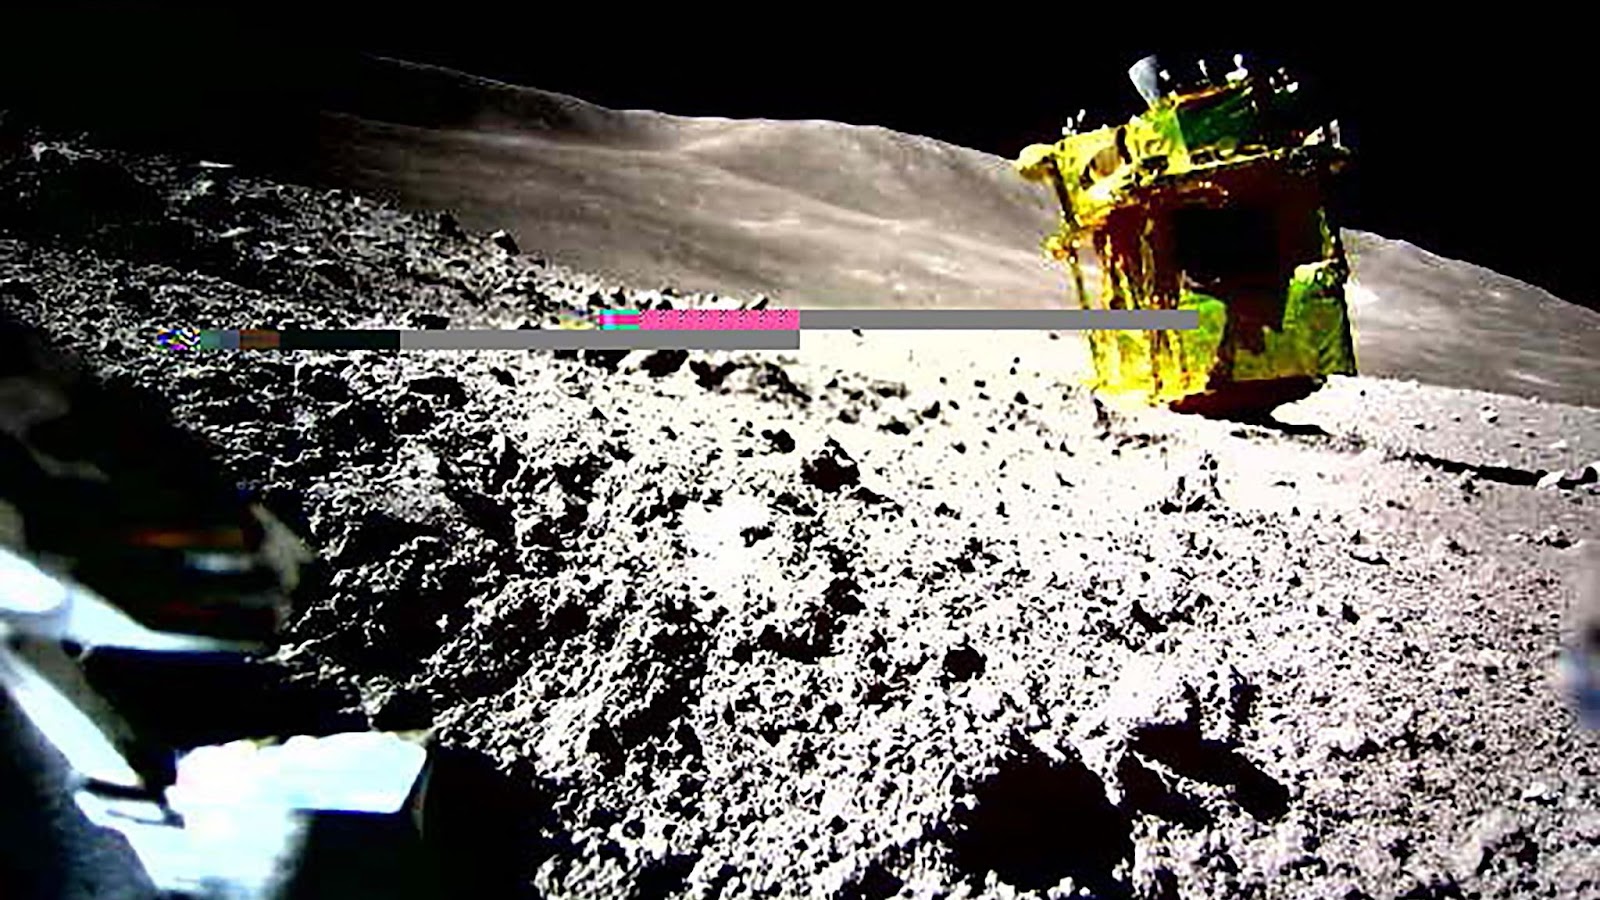 a photo of the upside-down SLIM lander on the moon